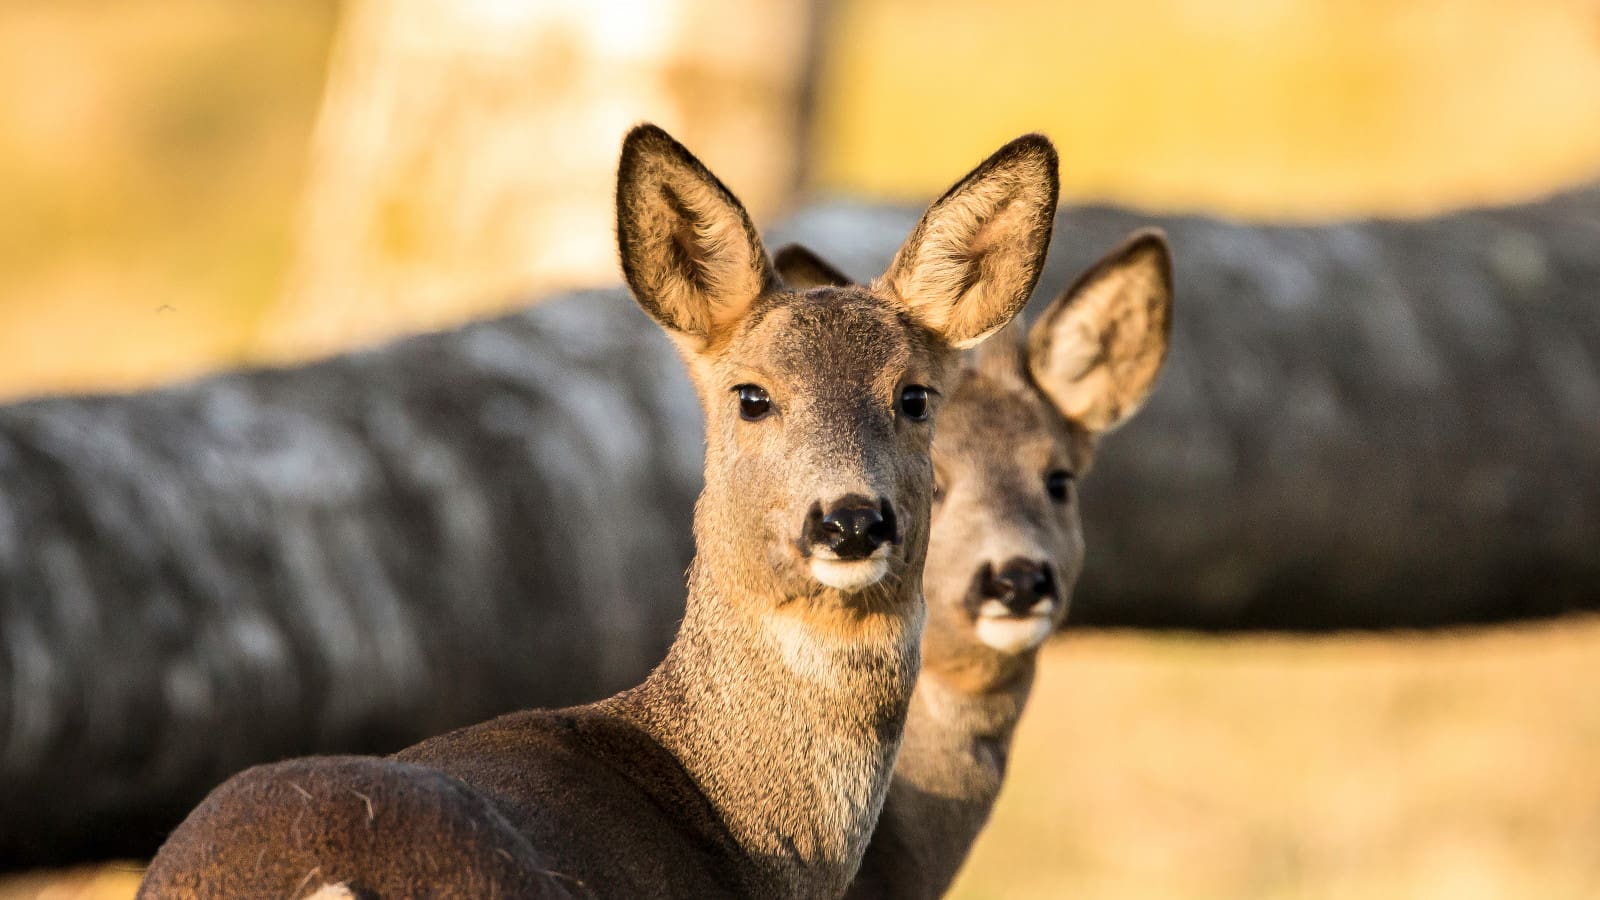 The parasites are suspected to be transmitted from deer to humans